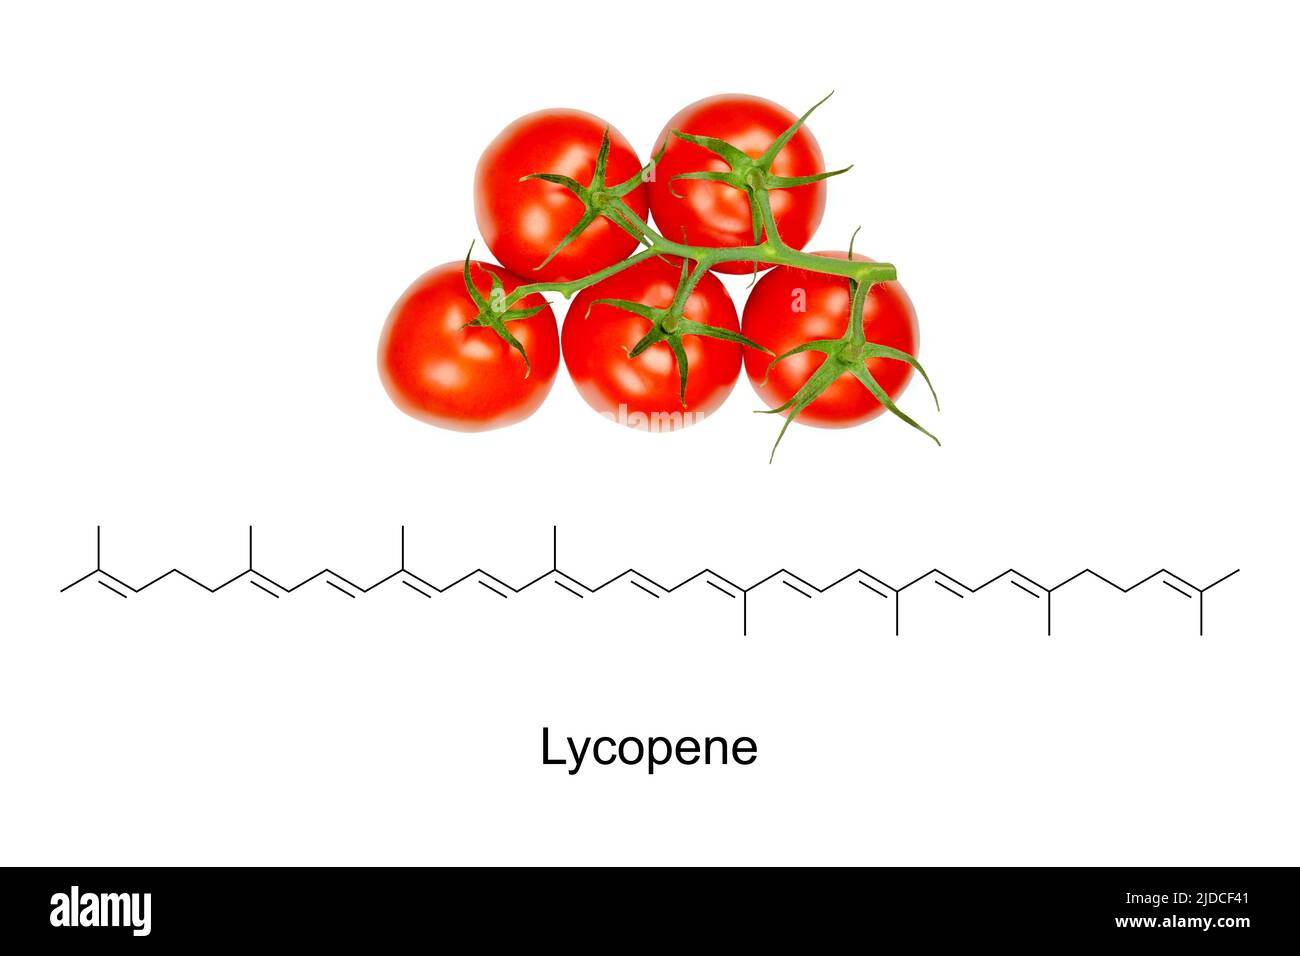 Panicle tomatoes and the chemical formula and skeletal structure of lycopene, a bright red carotene, used for food coloring, E160d. Stock Photo